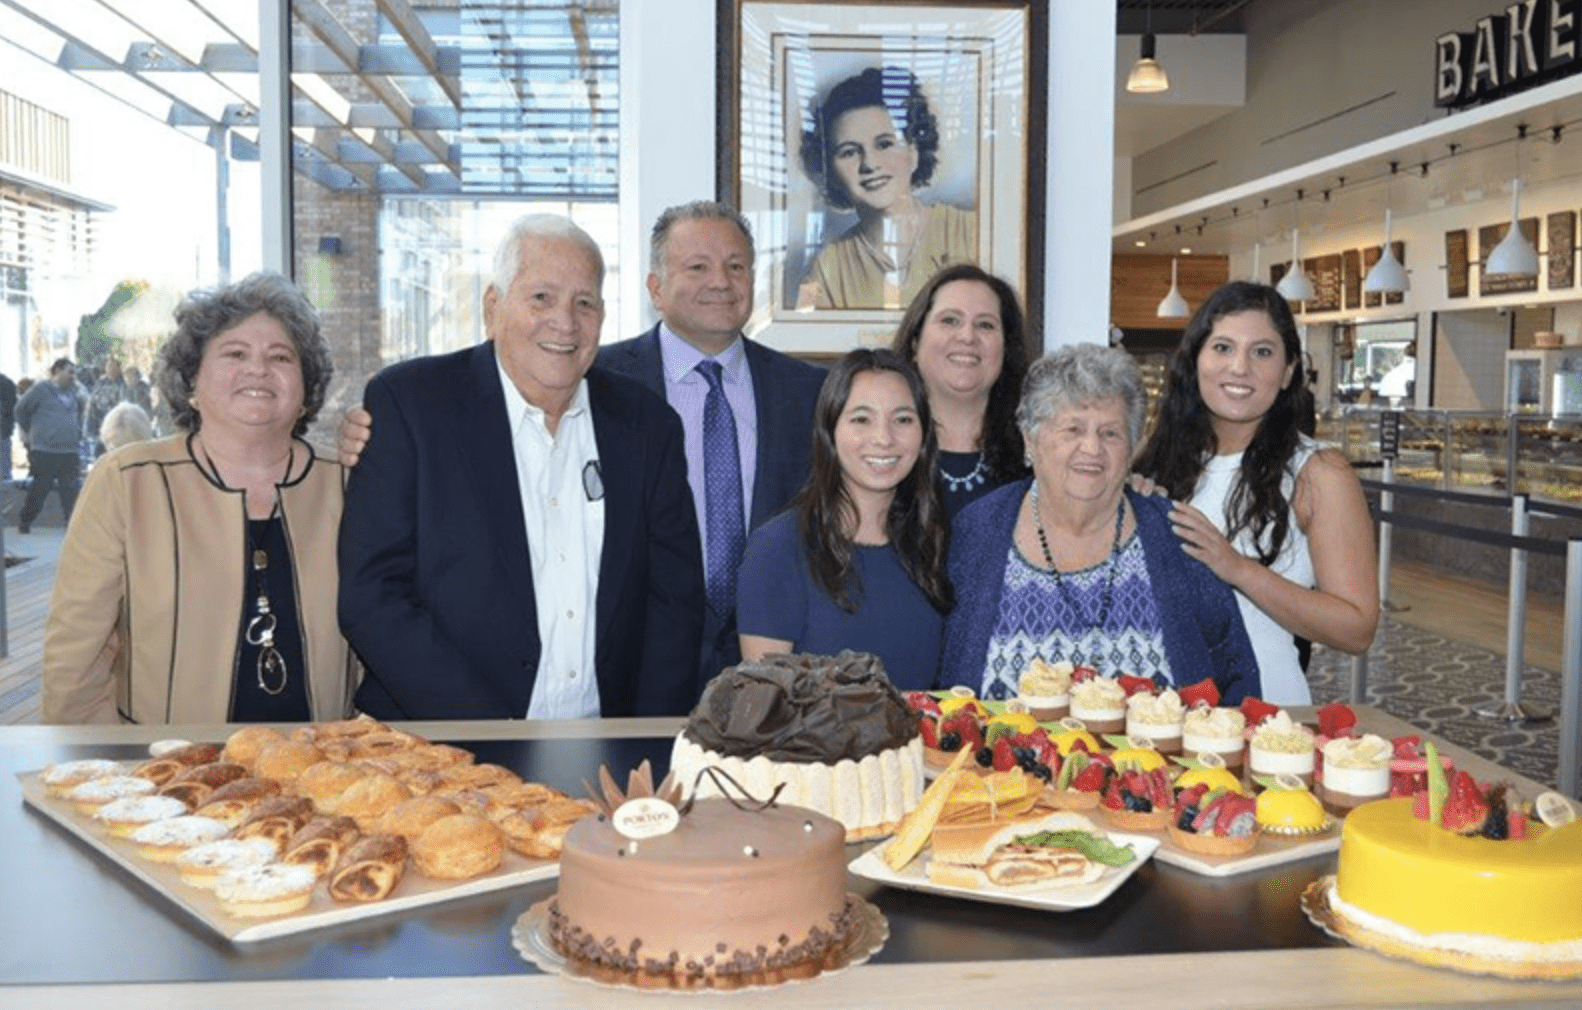 Founder of Popular L.A. Porto’s Bakery & Cafe Rosa Porto Dies at 89